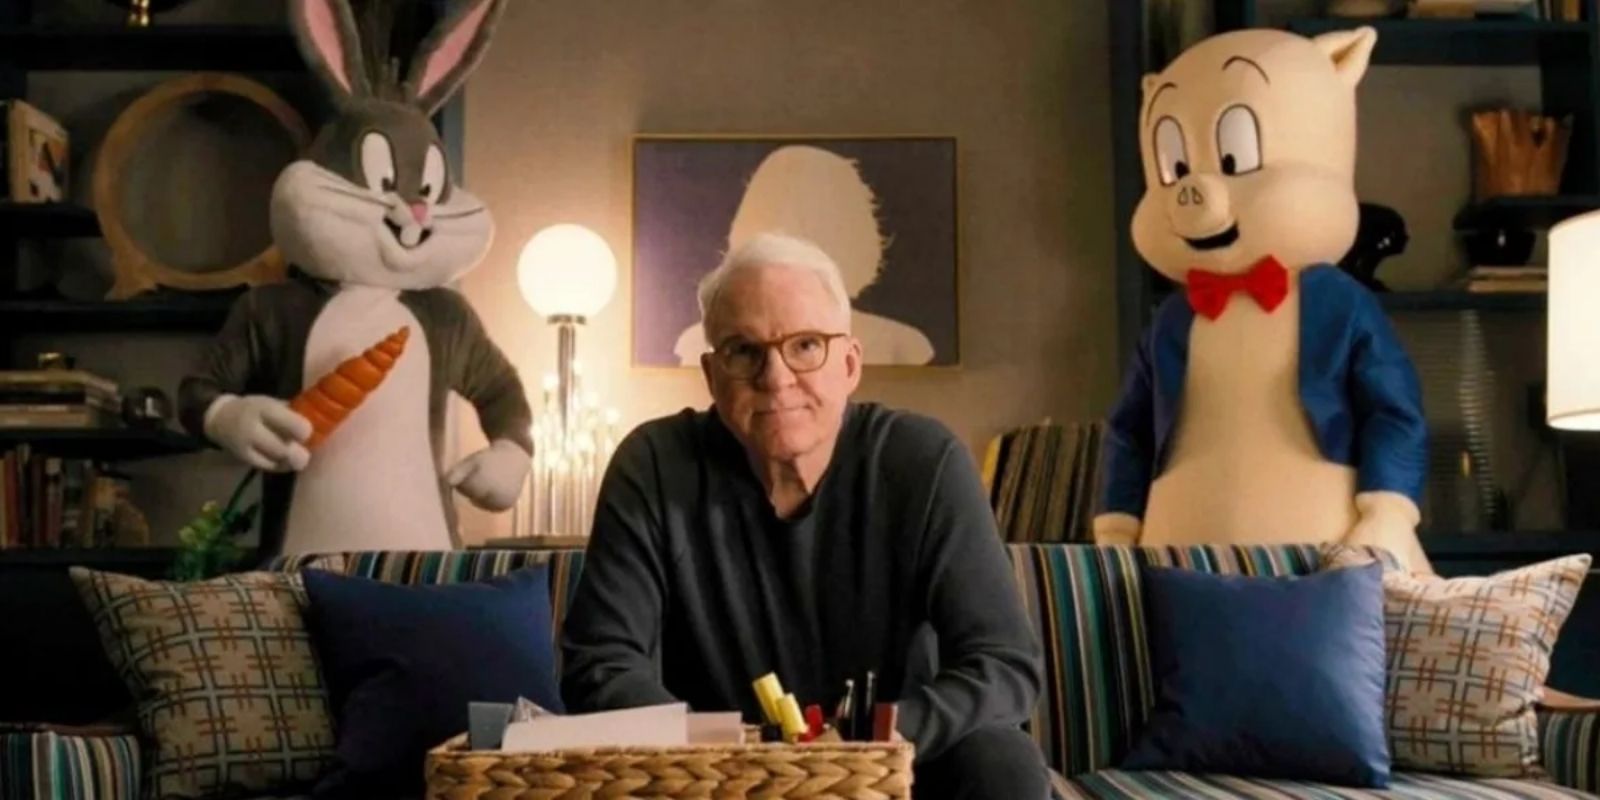 Bugs Bunny and Porky Pig stand behind Charles Haden Savages couch in Only Murders in the Building